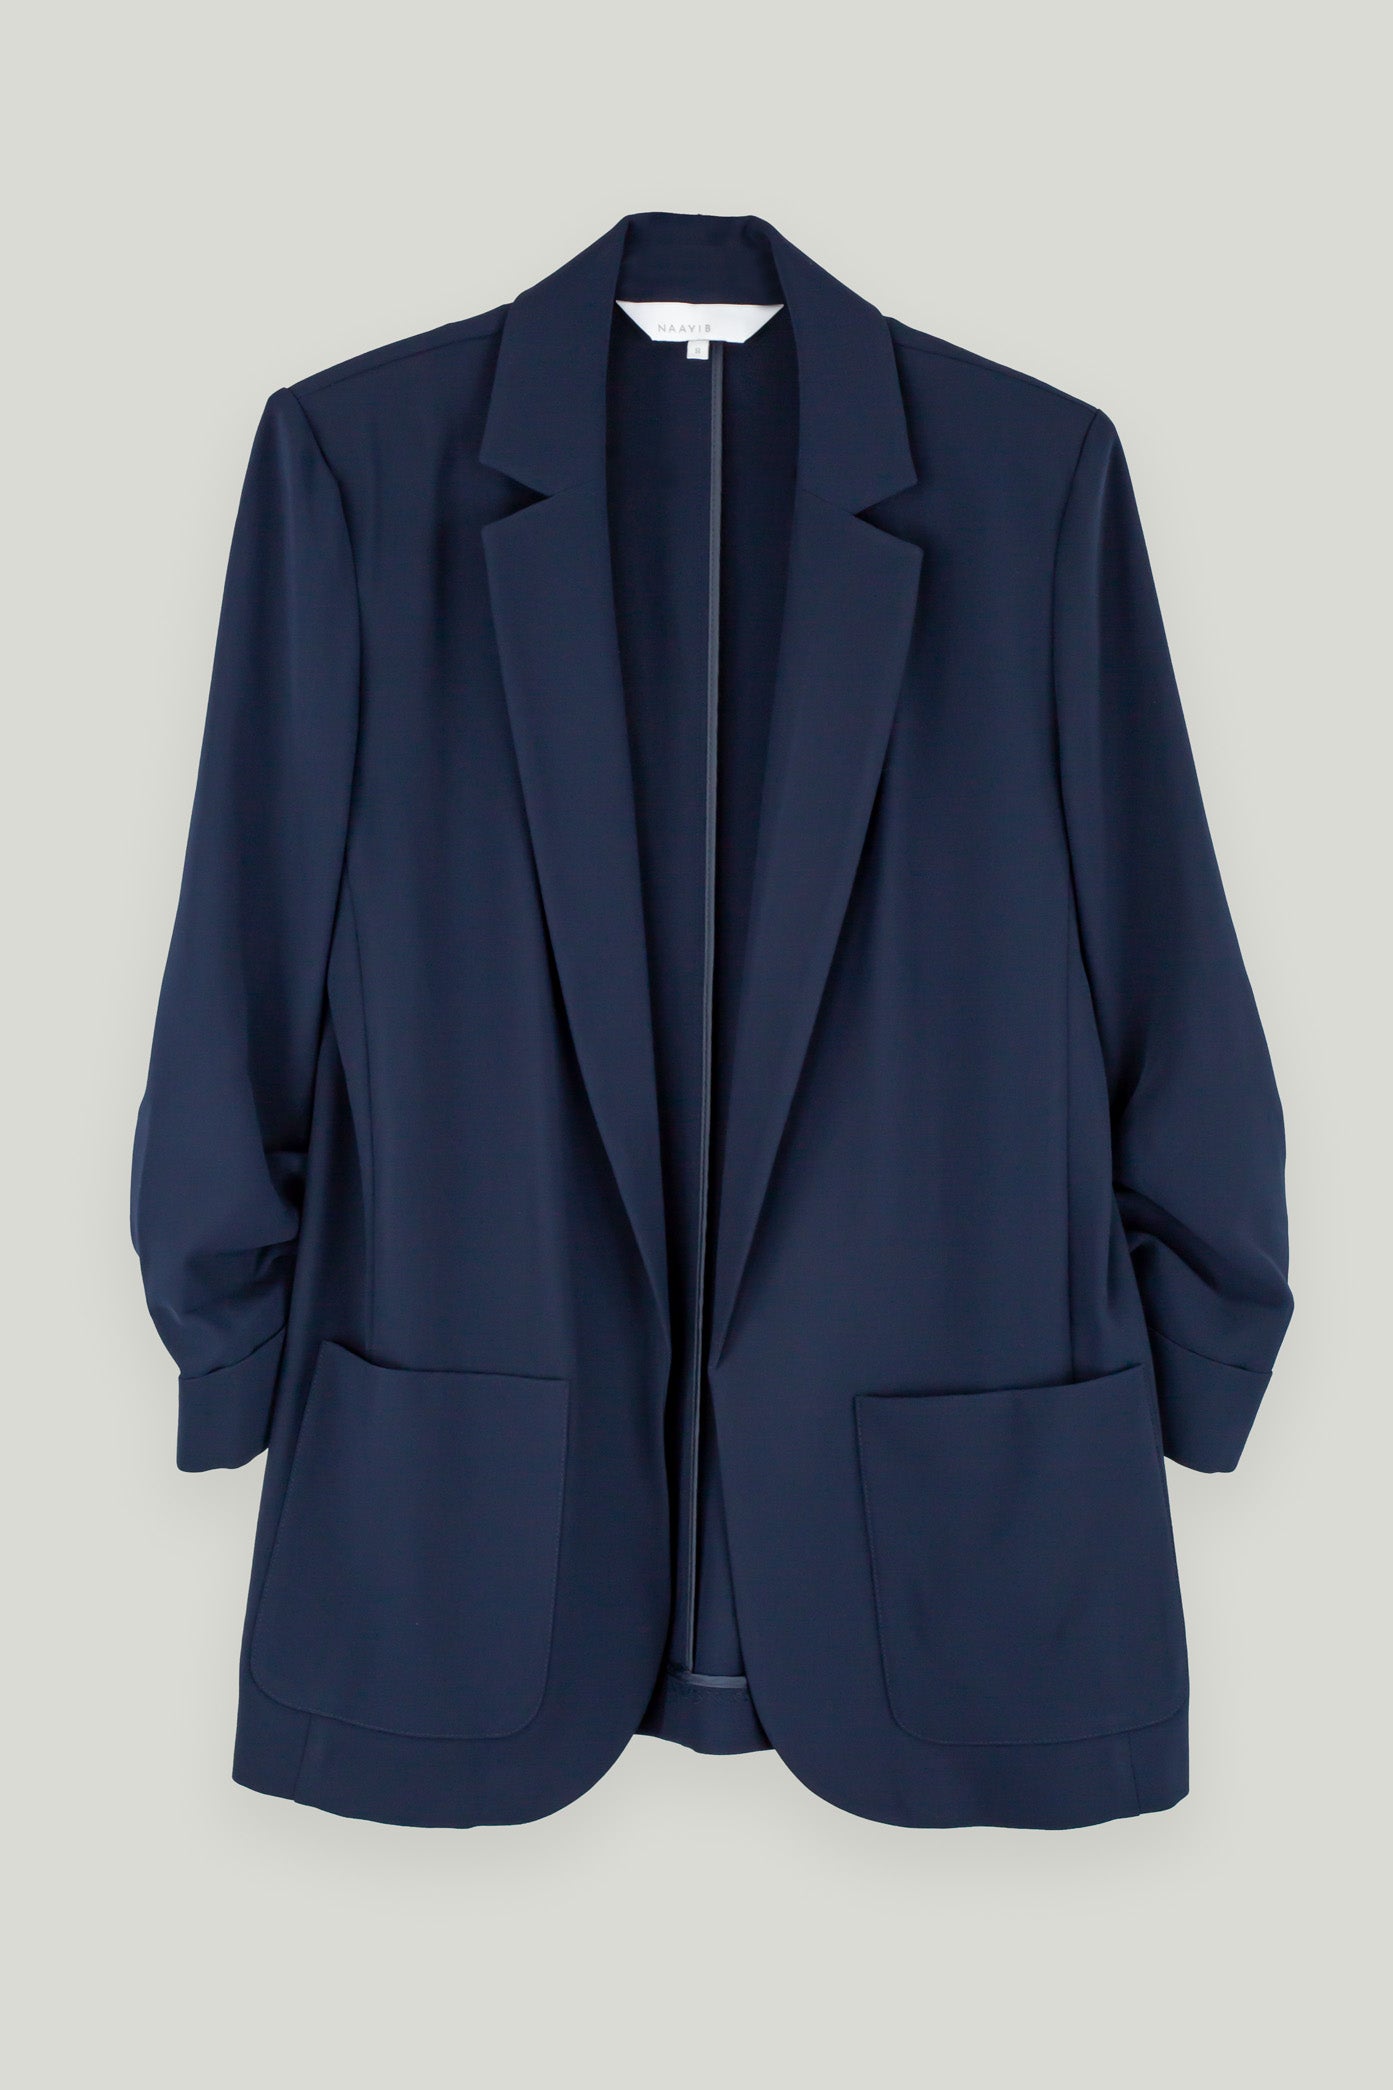 Relaxed Ruched Sleeve Navy Blazer